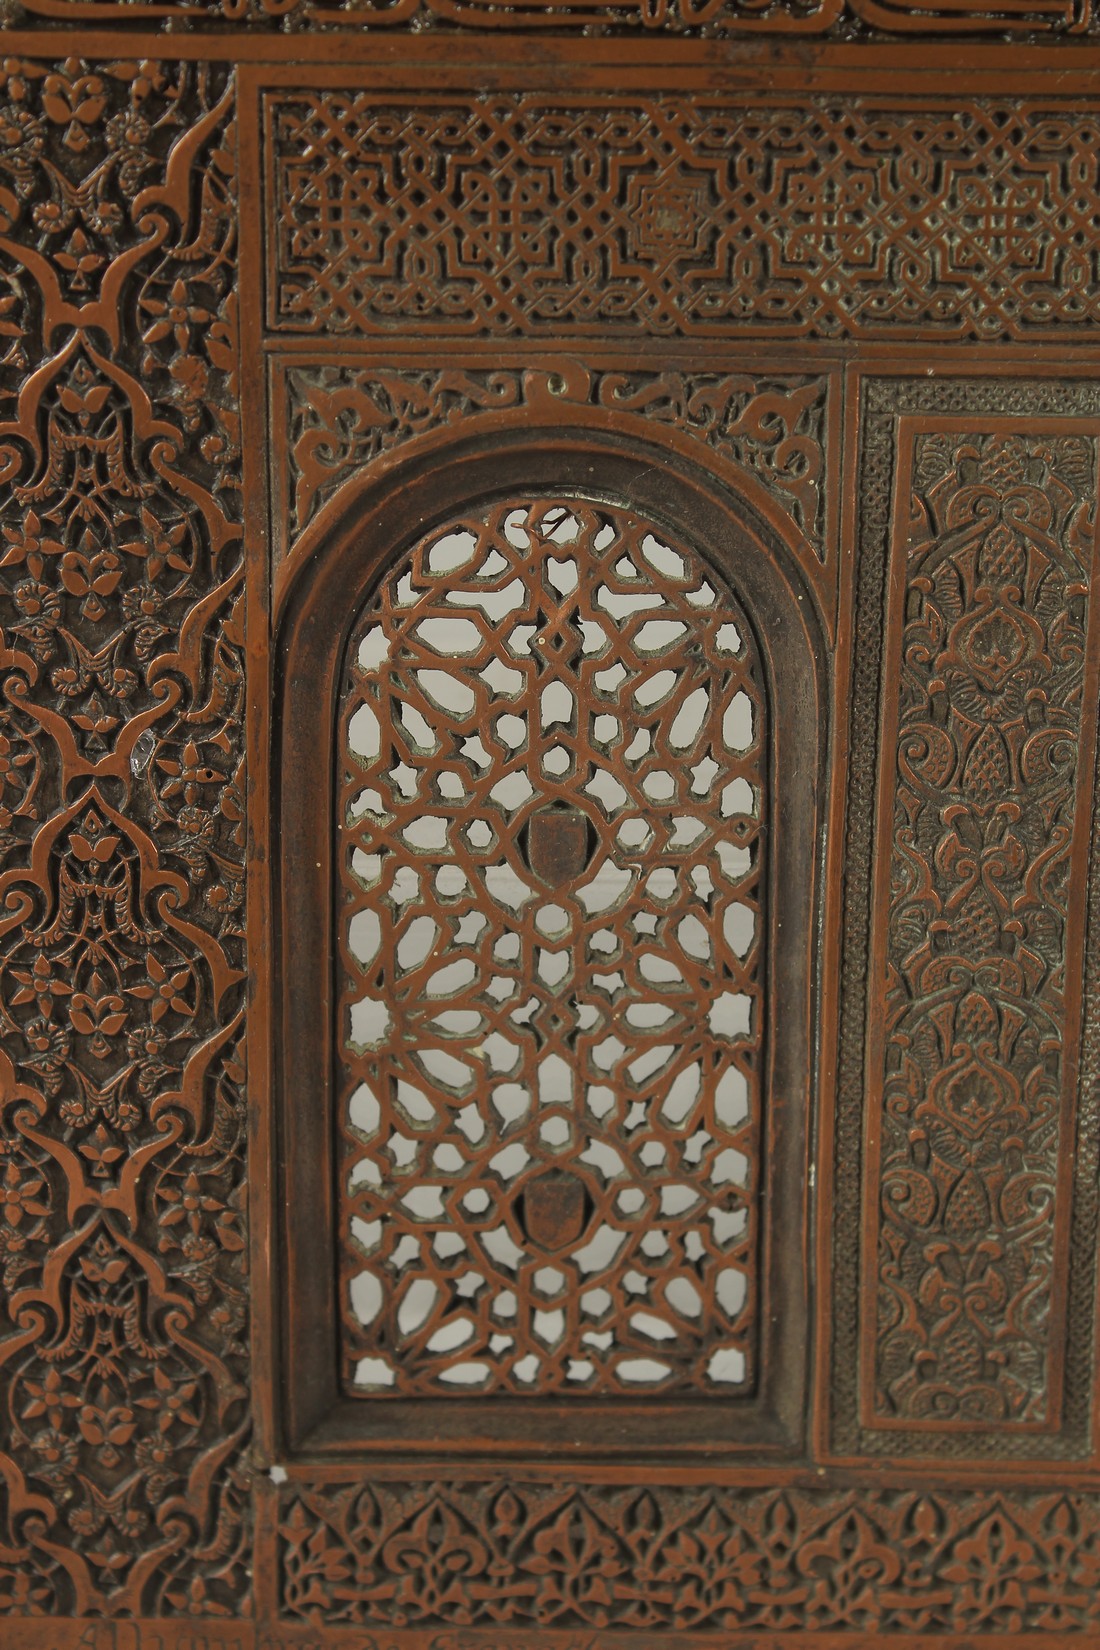 A VERY FINE 19TH CENTURY SPANISH HISPANO MORESQUE COPPER OPENWORKED PANEL, SIGNED R. CONTTRERAS, - Image 2 of 10